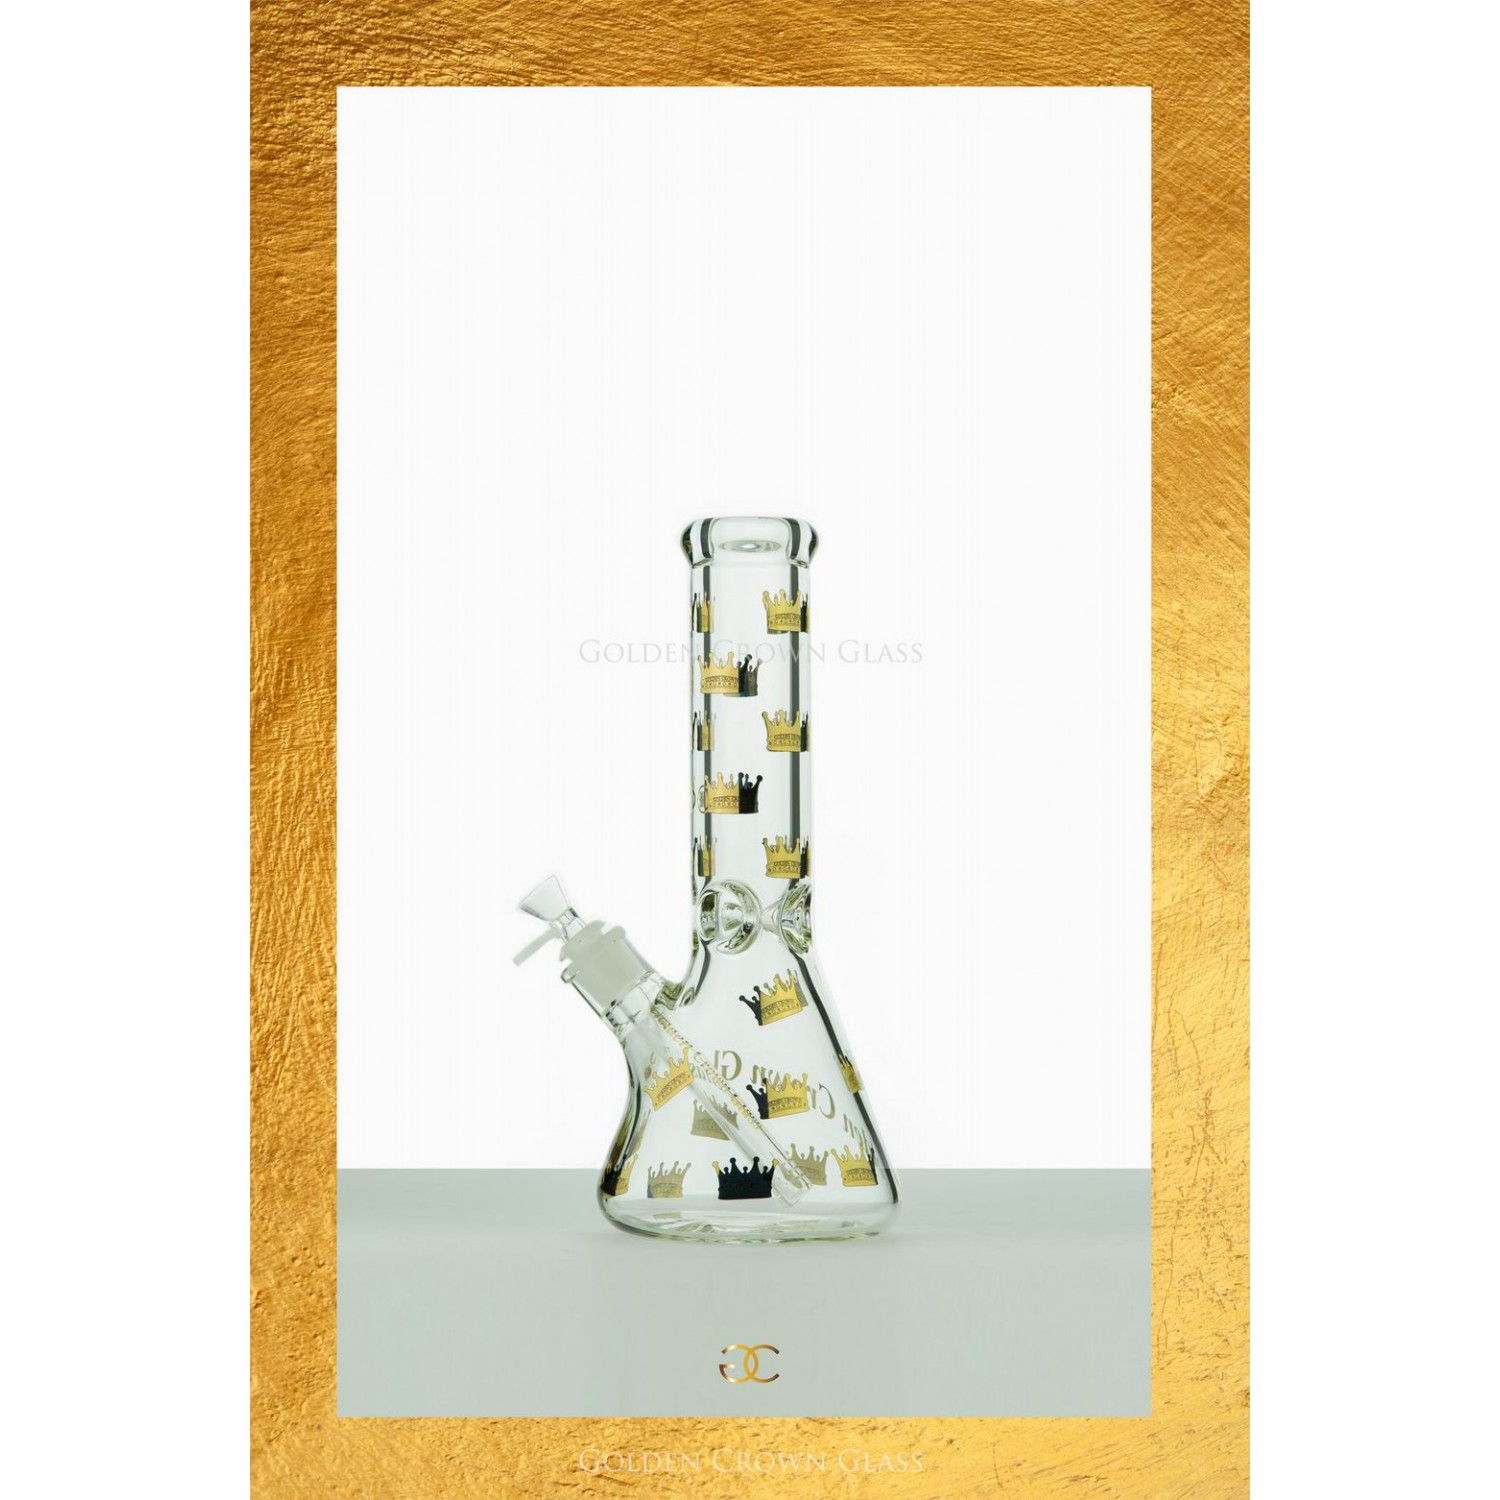 The Royal Crown Waterpipe 12" by GOLDEN CROWN